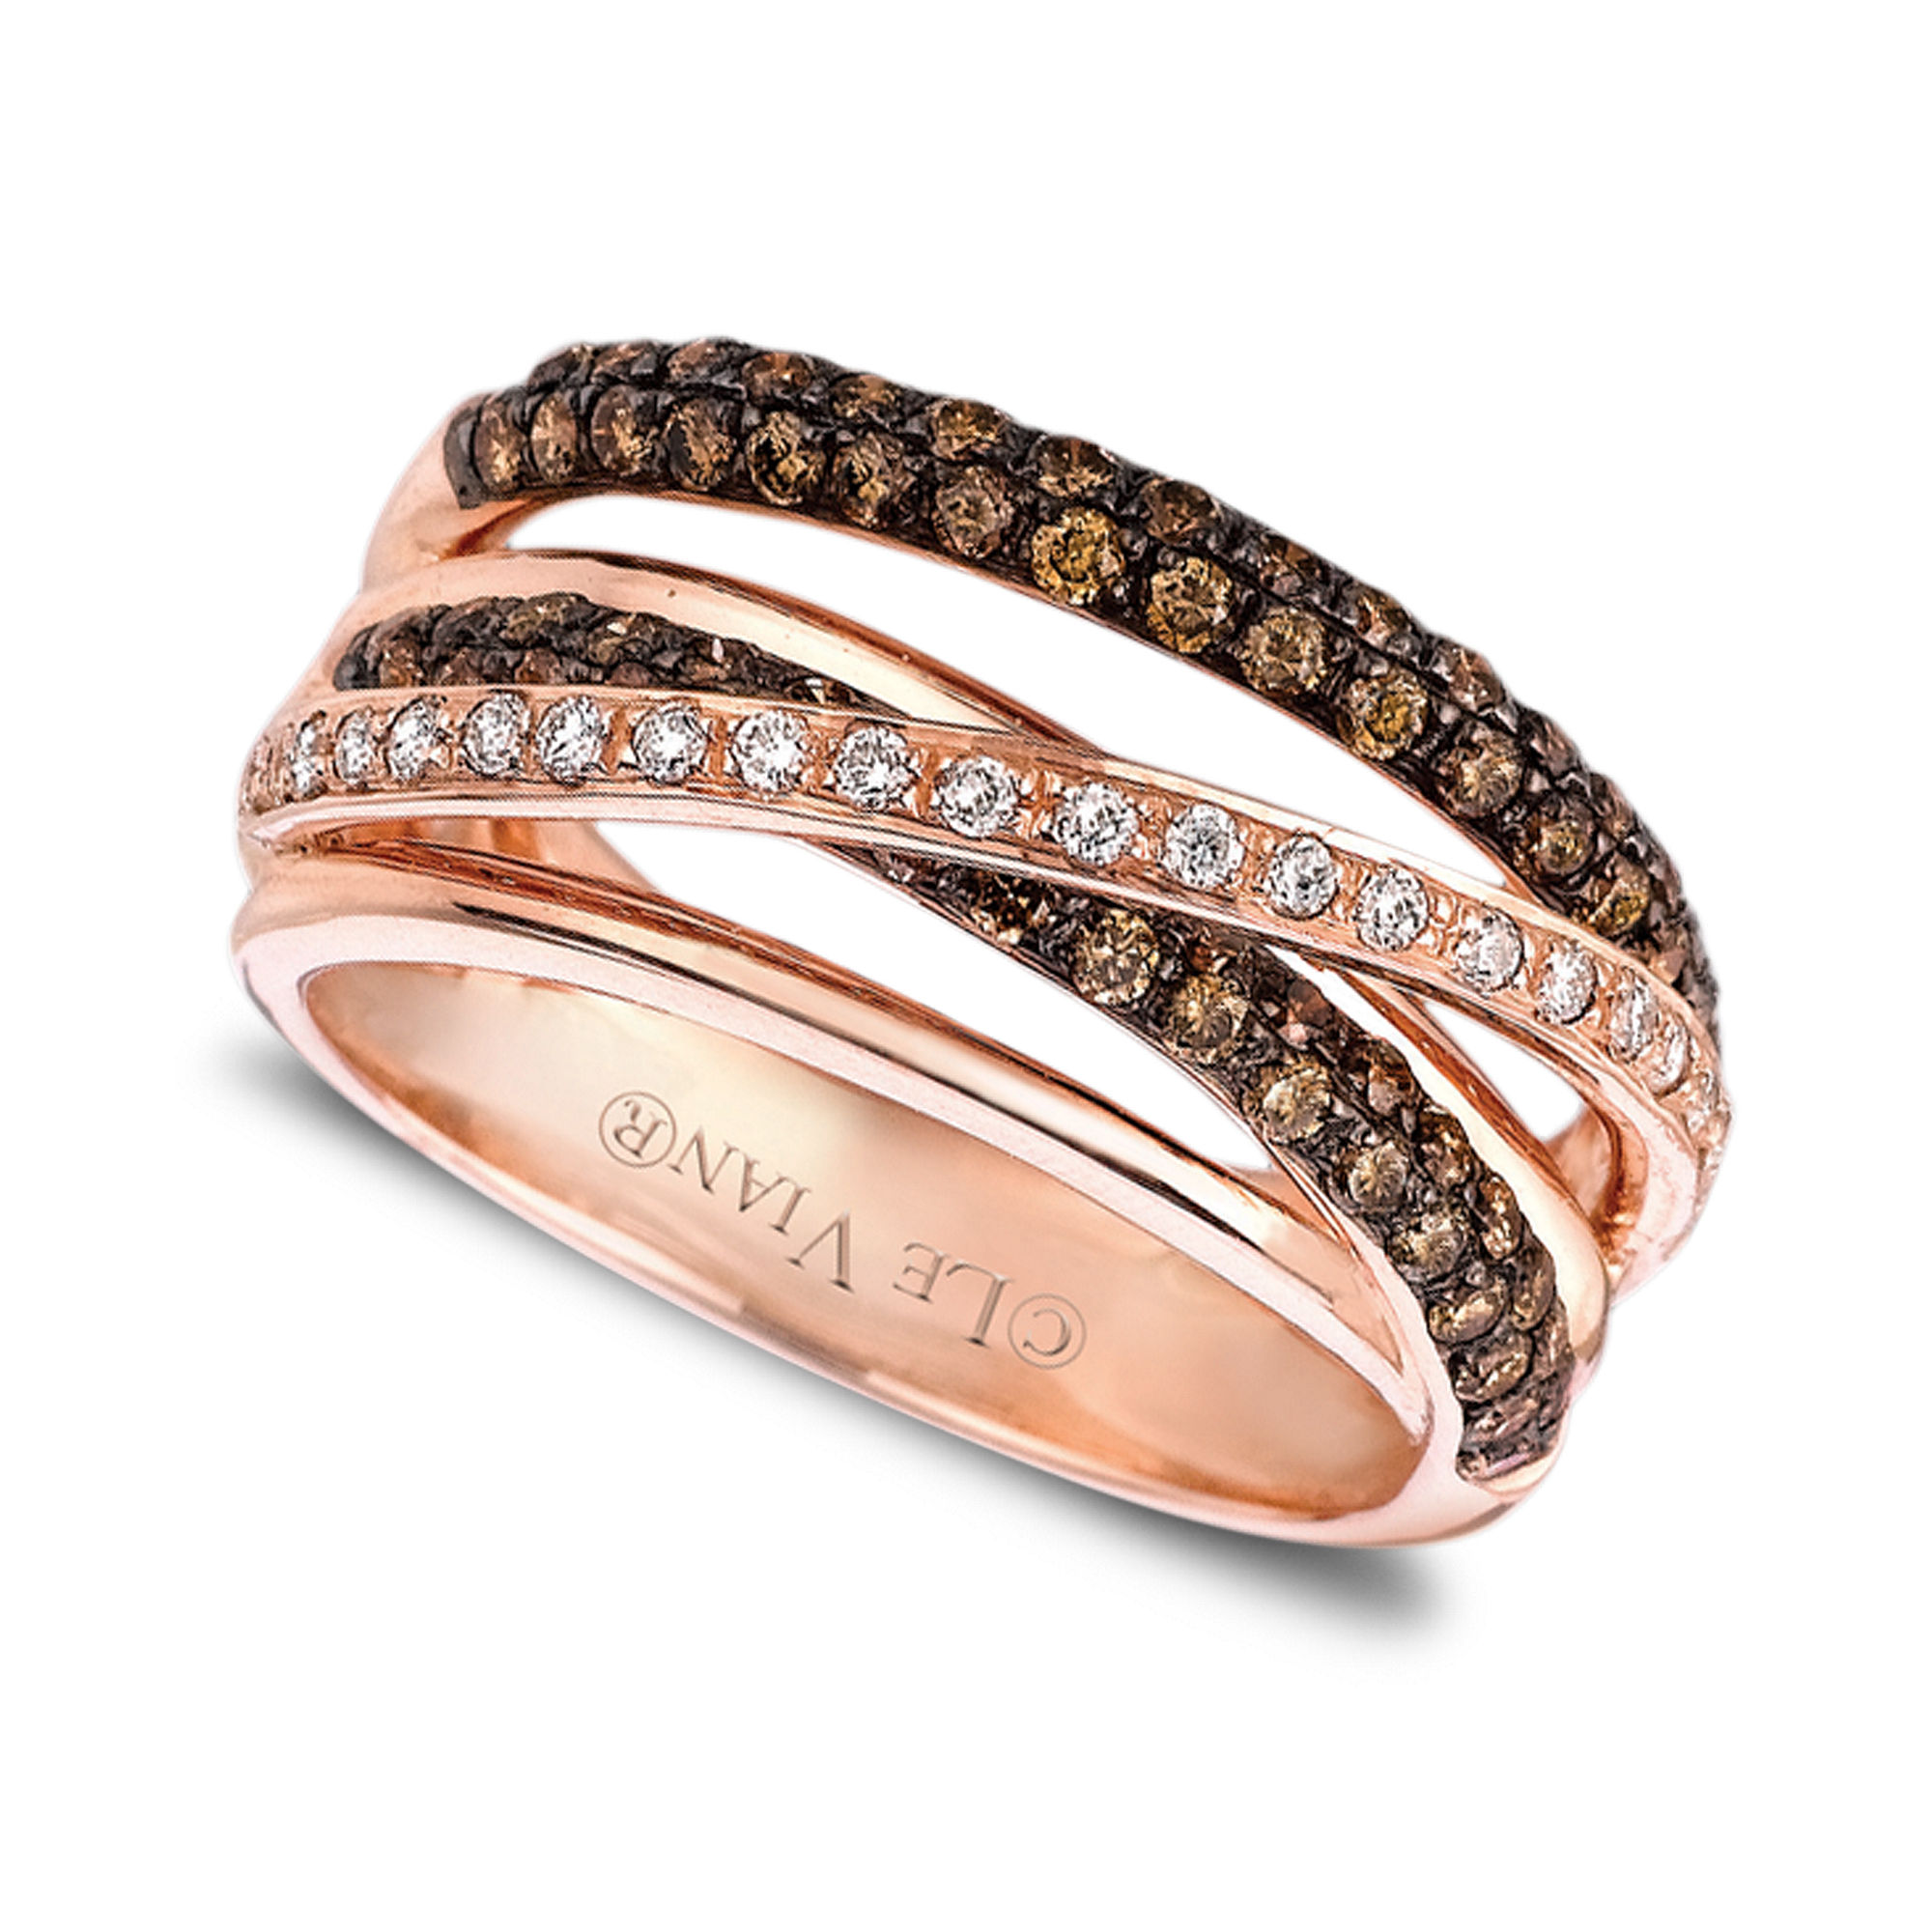 Le Vian No Color 14k Rose Gold White And Chocolate Diamond Crisscross Ring 78 Ct Tw Product 1 12468227 871902059 